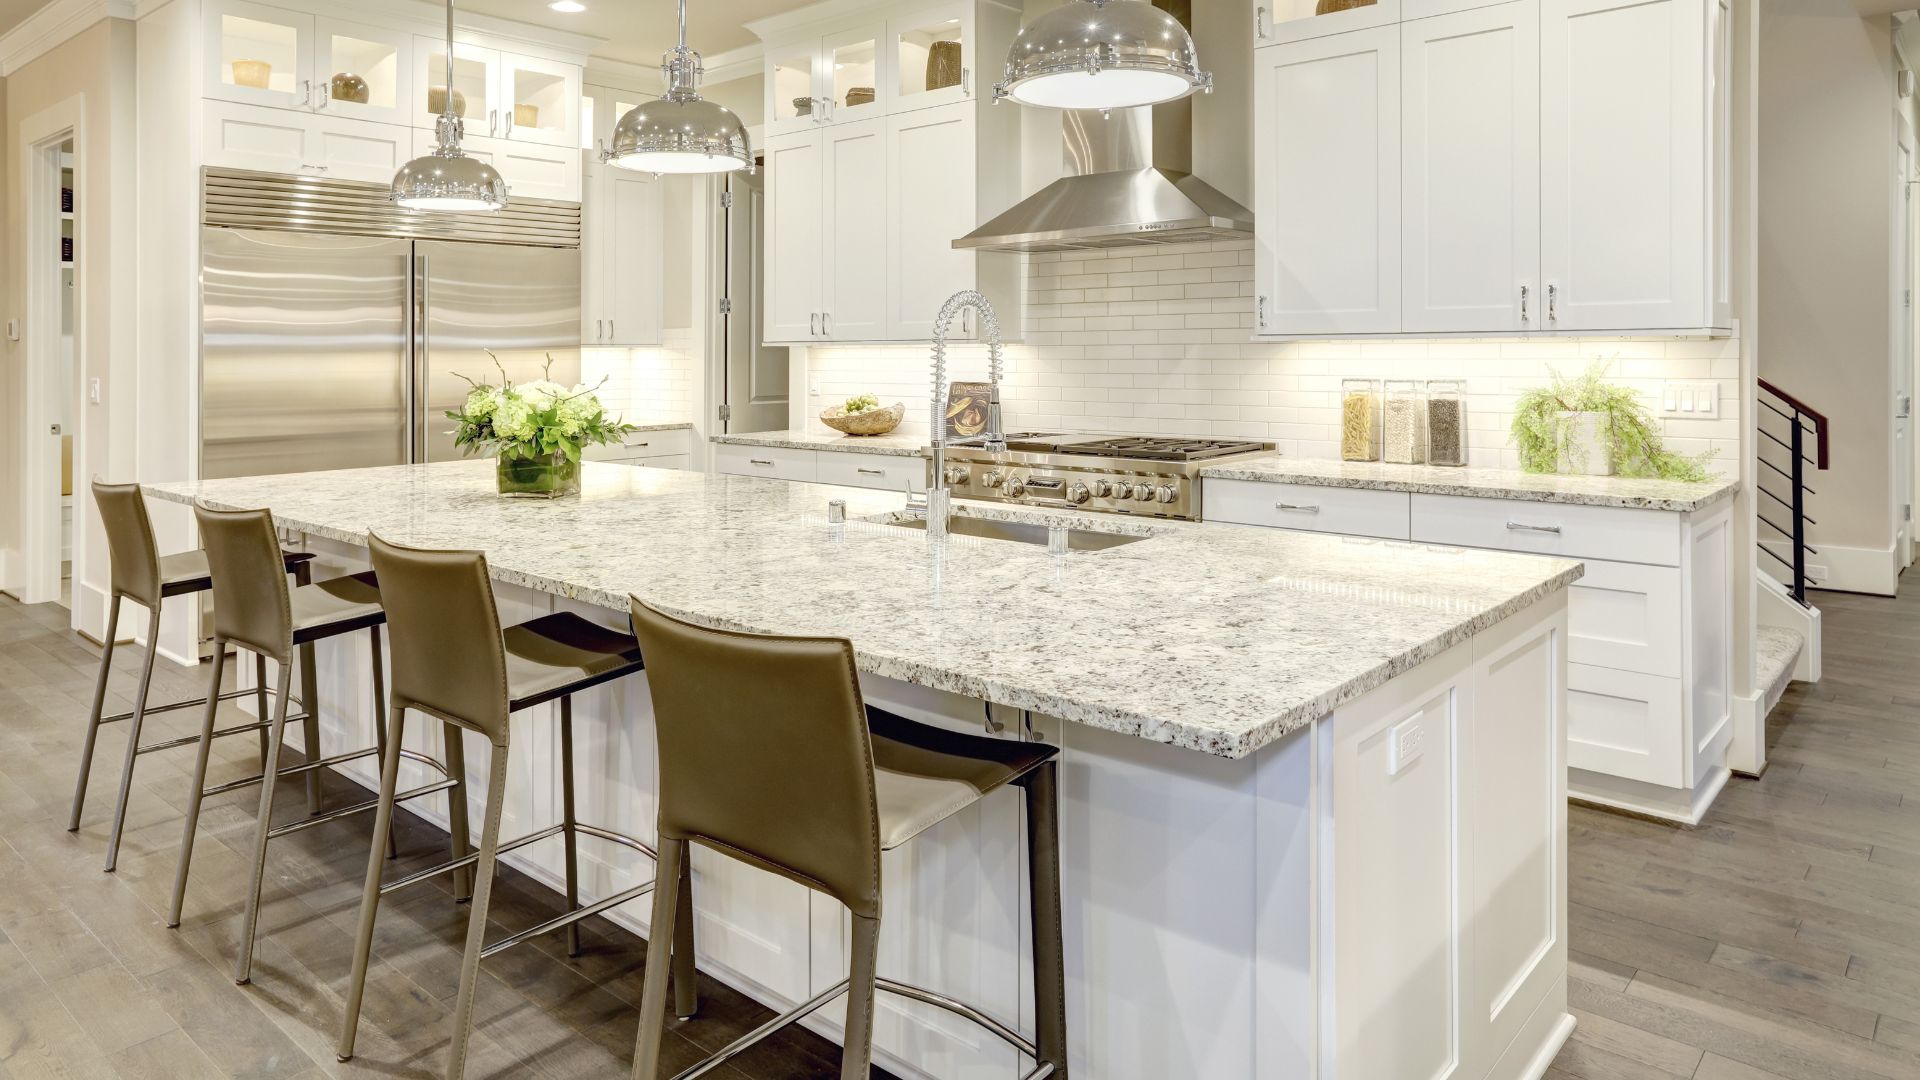 What are the things you need to consider for kitchen remodeling